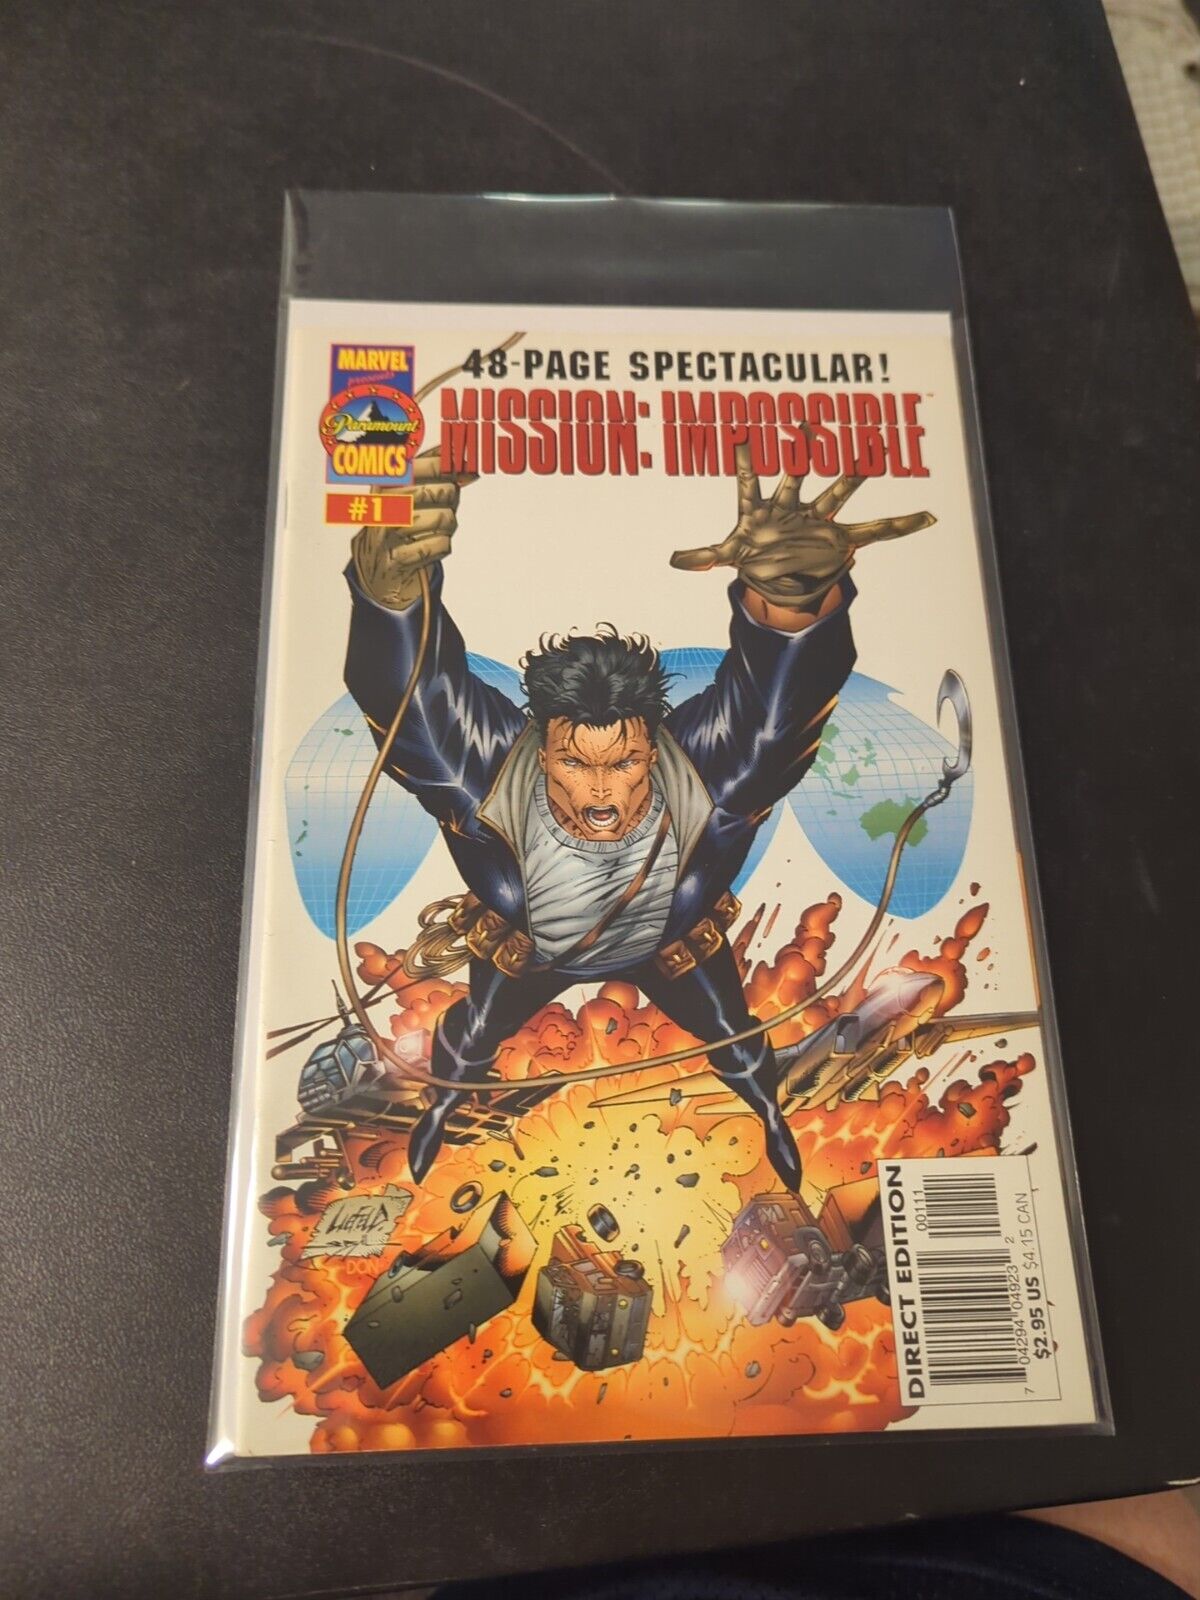 Mission Impossible #1 Marvel Comics 1996 Rob Liefeld cover